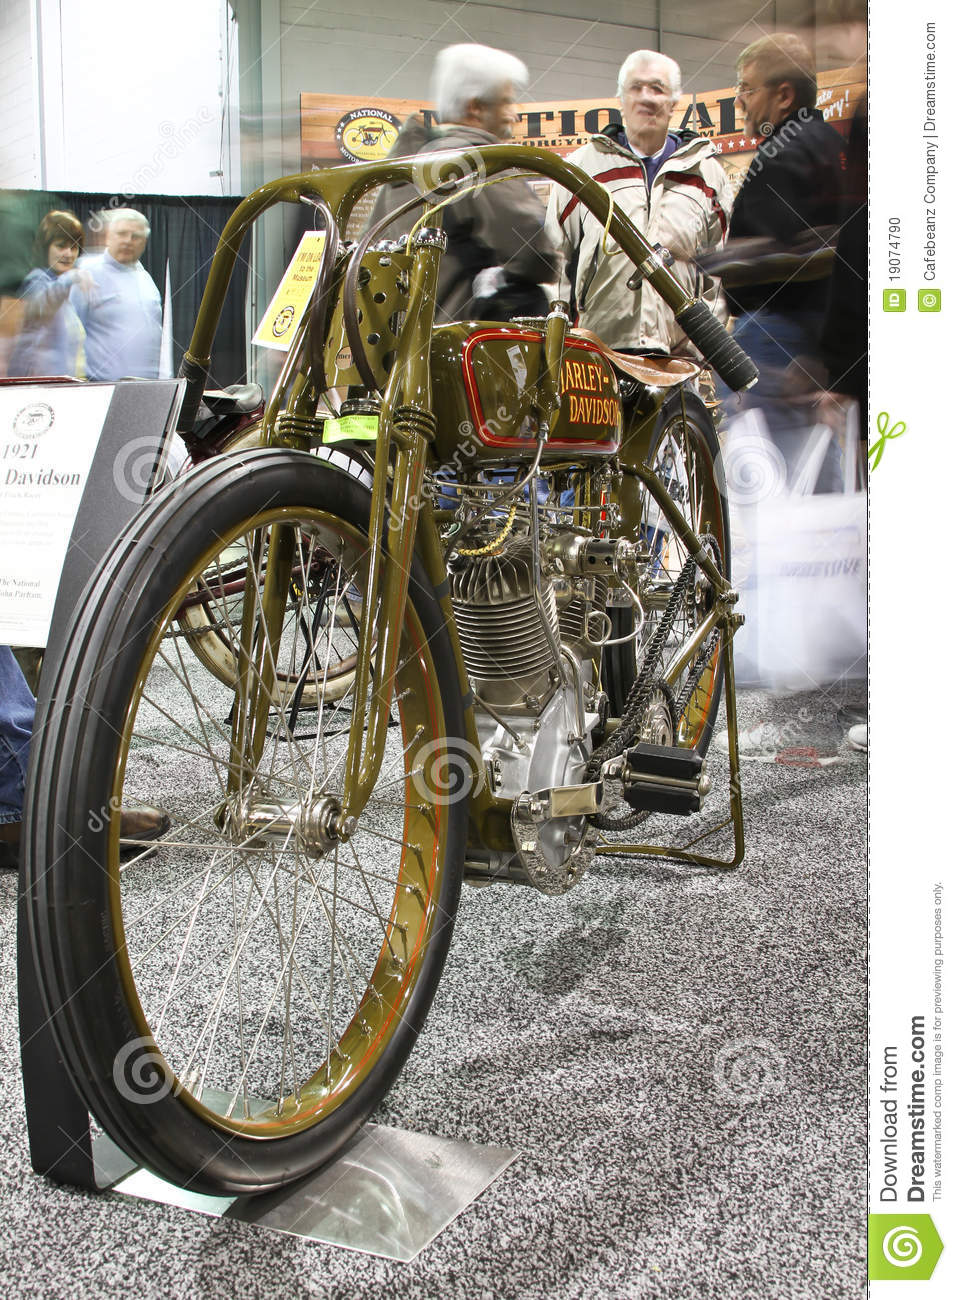     Antique Harley Davidson Motorcycle Displayed At The Chicago Motorcycle